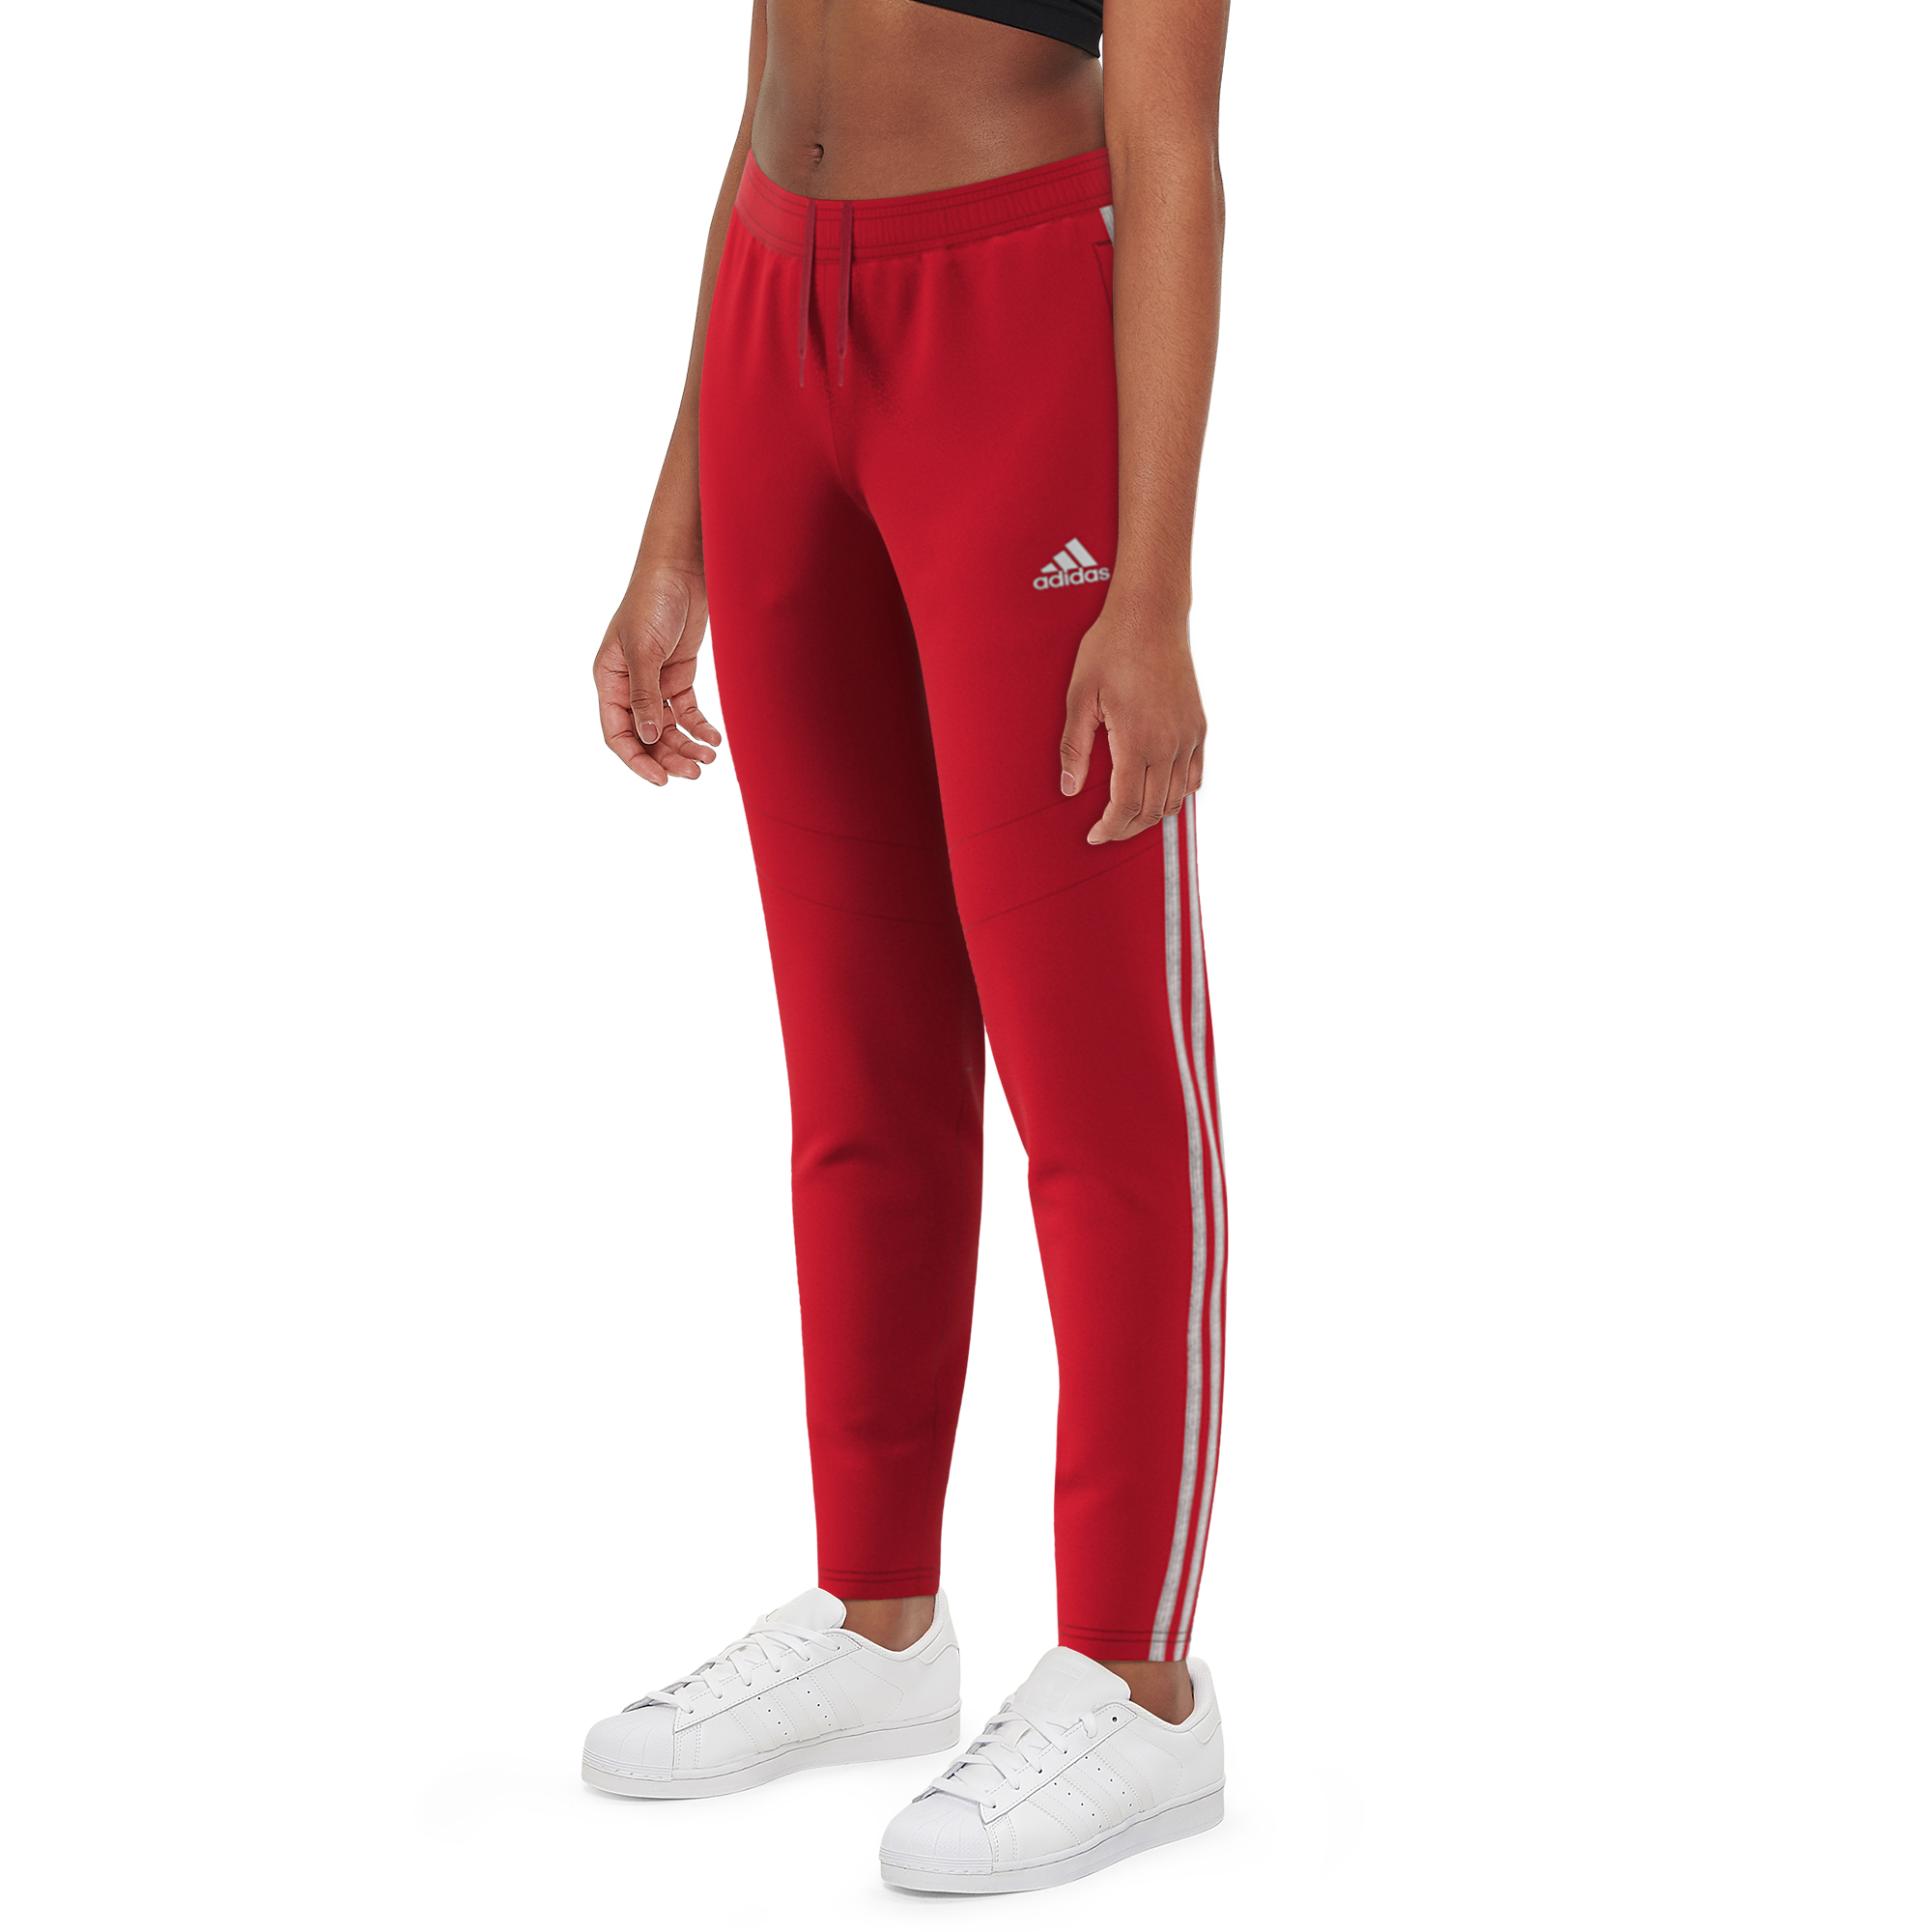 adidas joggers red white and blue